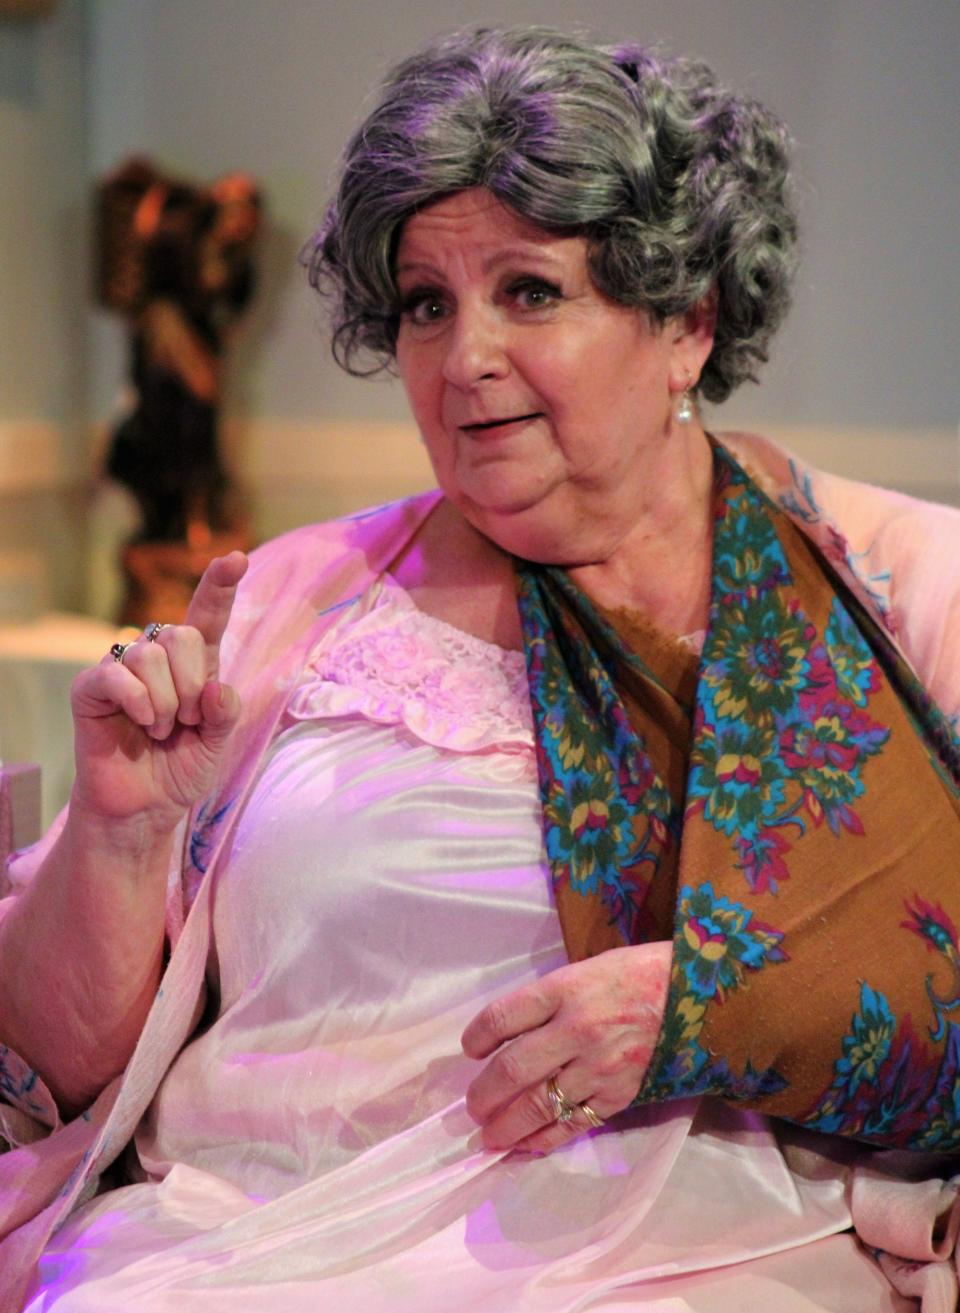 Pam Peraza portrays a woman in her 90s who tells stories about the ups and down in her life in this rehearsal scene from "Three Tall Women," Abilene Community Theatre's season-ending drama.